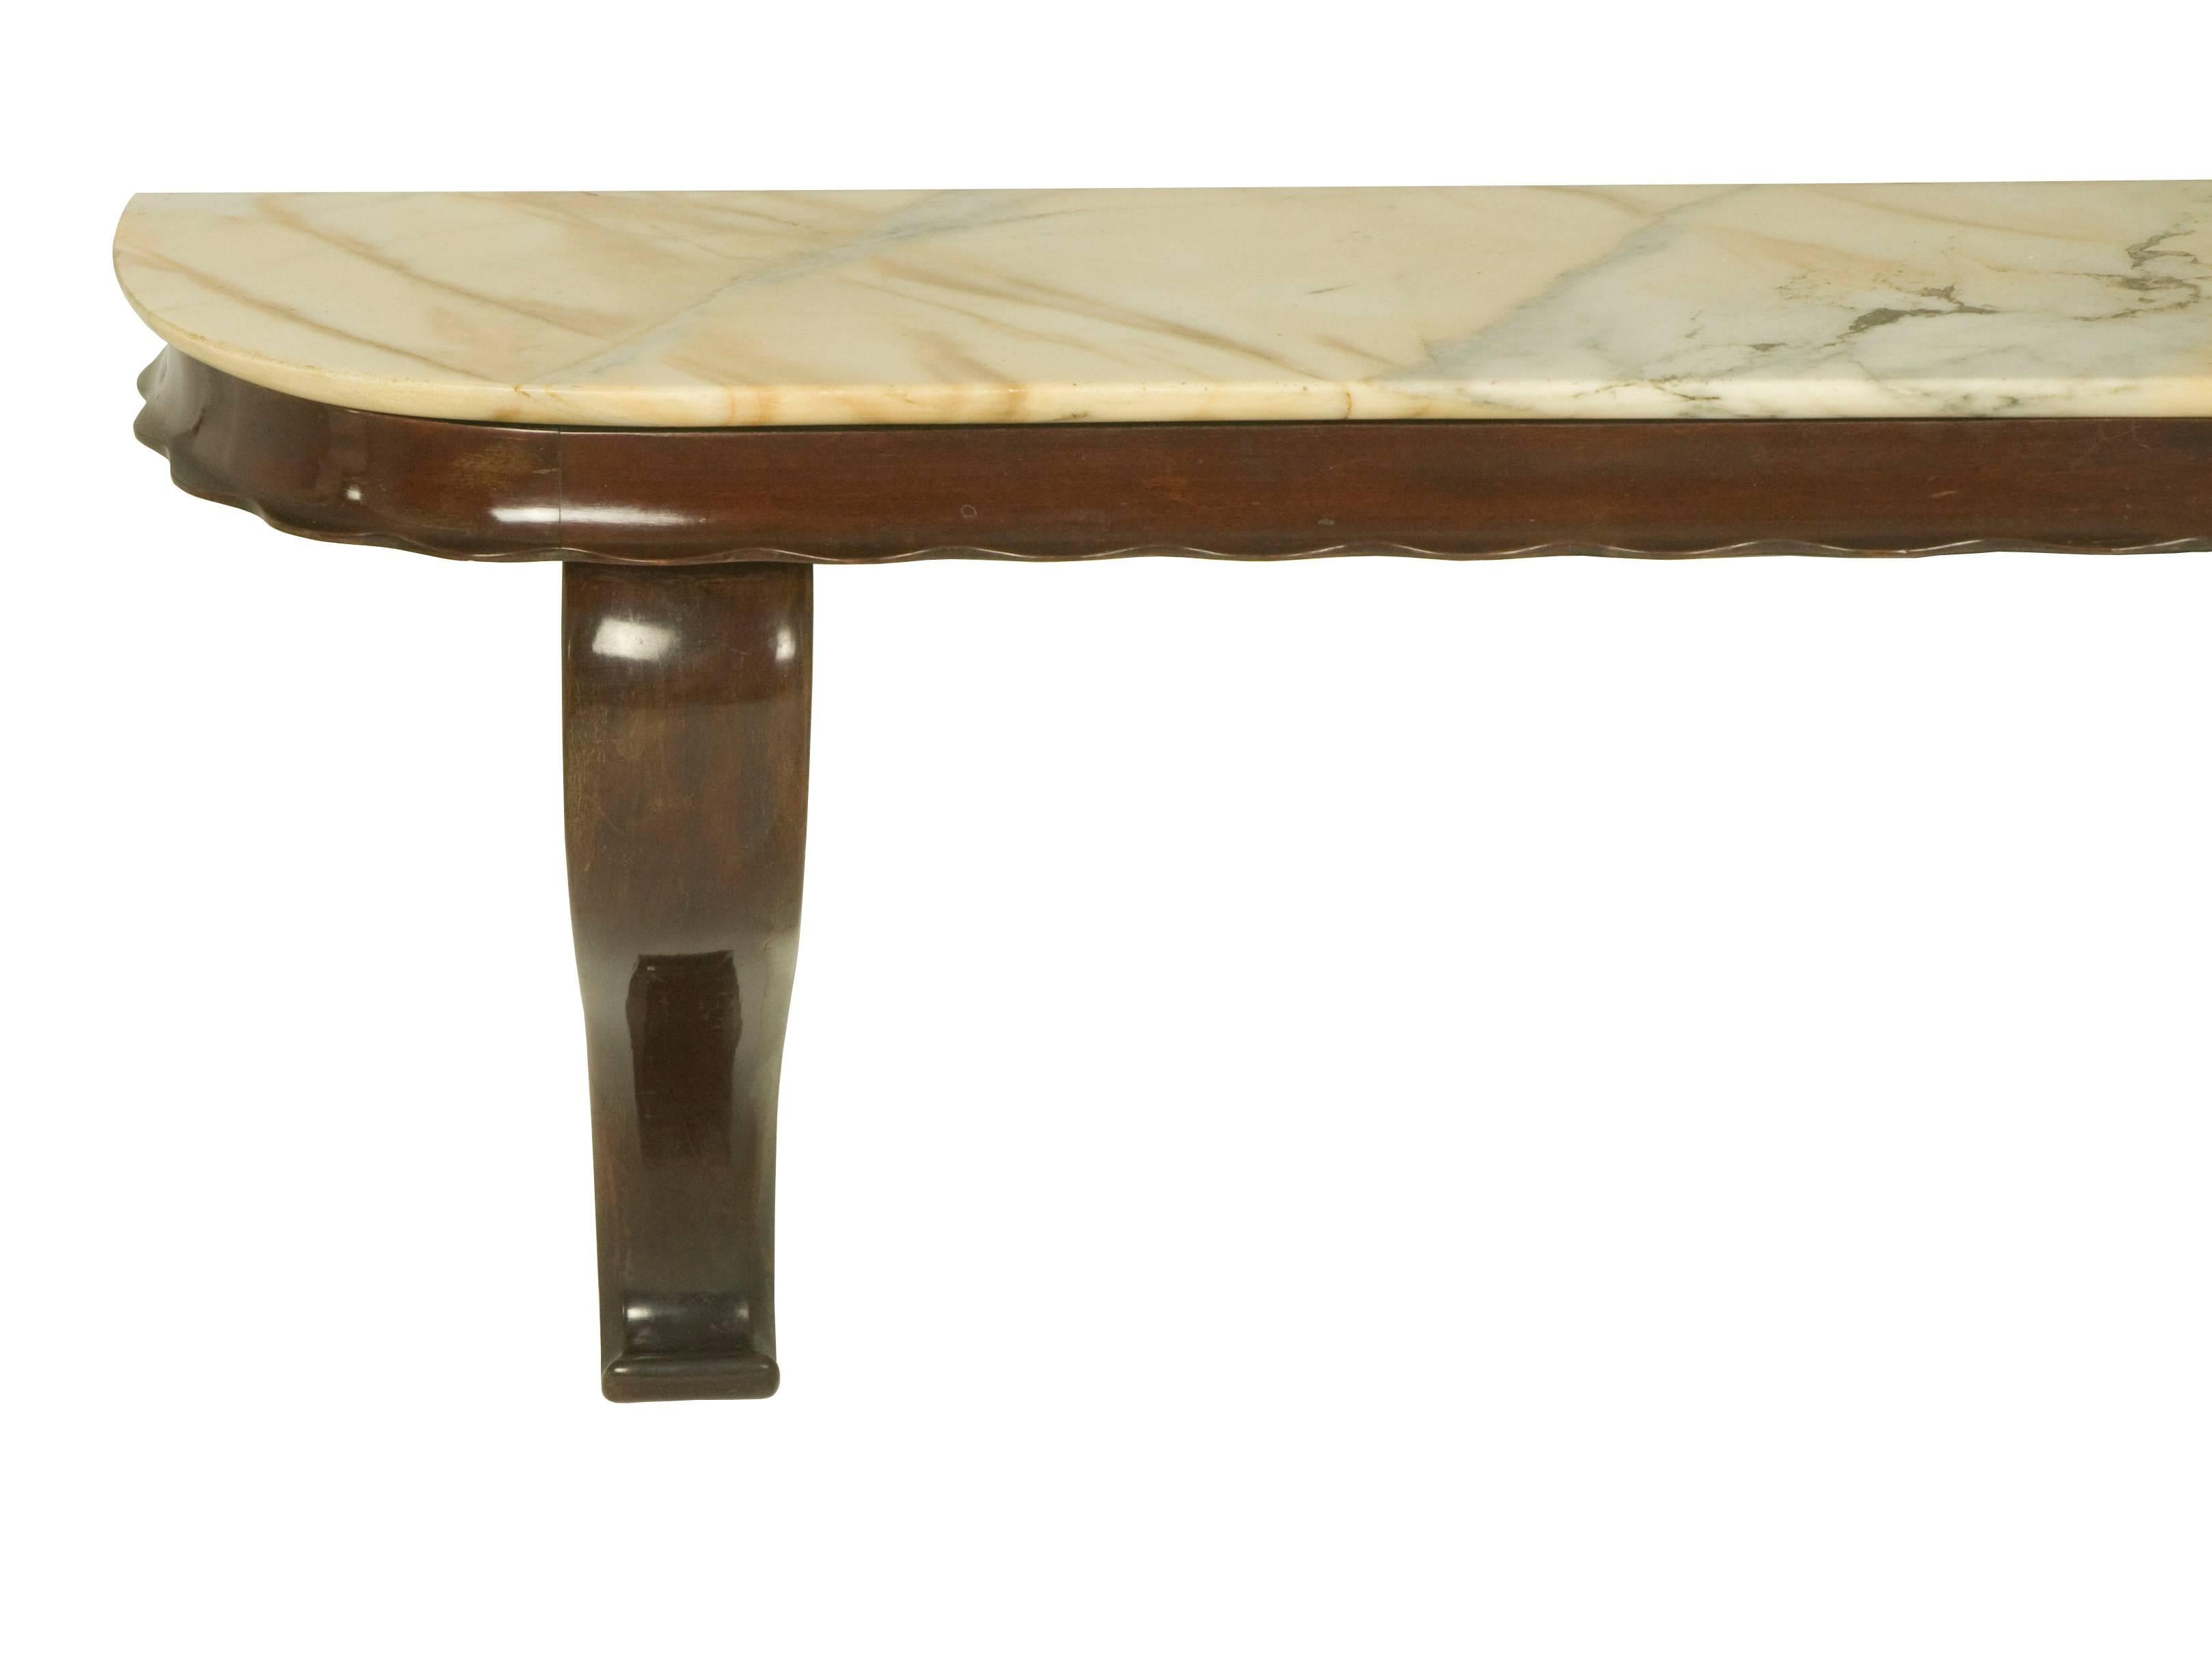 This fine console table was manufactured by Fratelli Barni Mobili d'Arte, a small manufacturer based in Seveso, near Milan, circa 1950s. It is made from lacquered wood and a marble top and it is wall-mounted. It remains in an overall very good